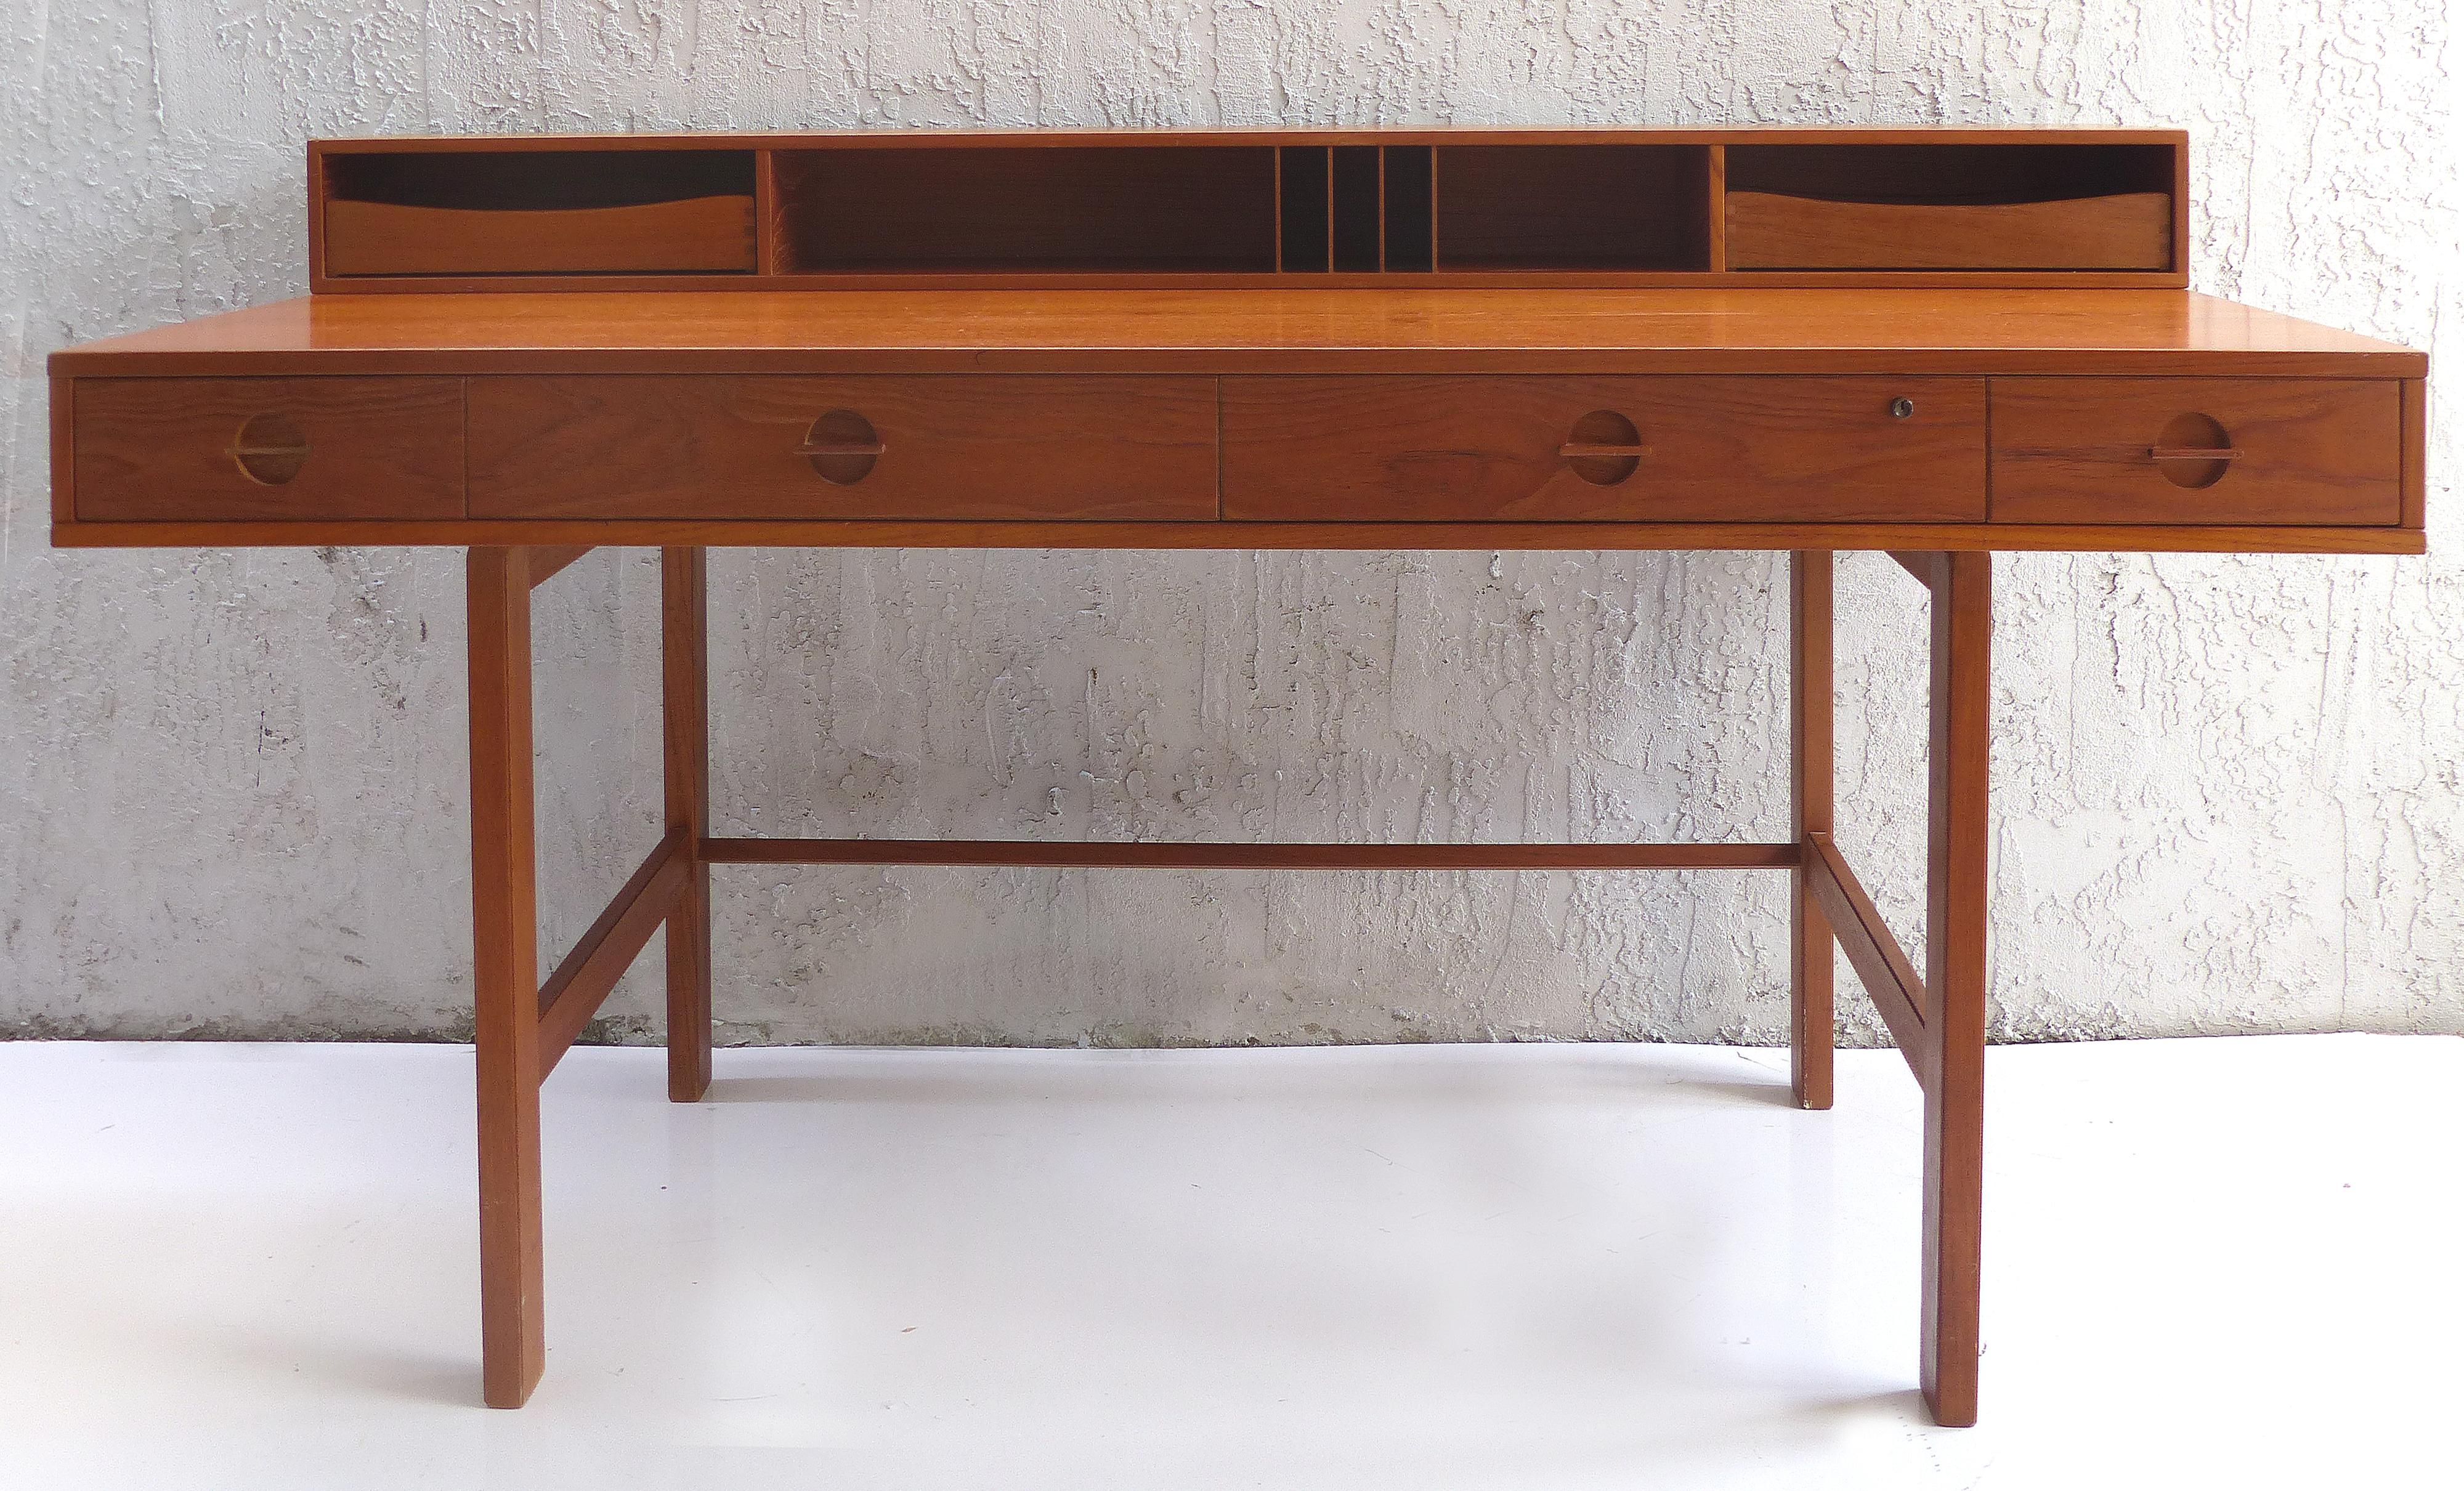 Offered for sale is an iconic Danish modern teak desk by Jens Quistgaard of Dansk for Peter Løvig Nielsen. The desk offers a very practical hinged gallery to top that flips down to expand into a partner's desk or extended work surface. Measure: